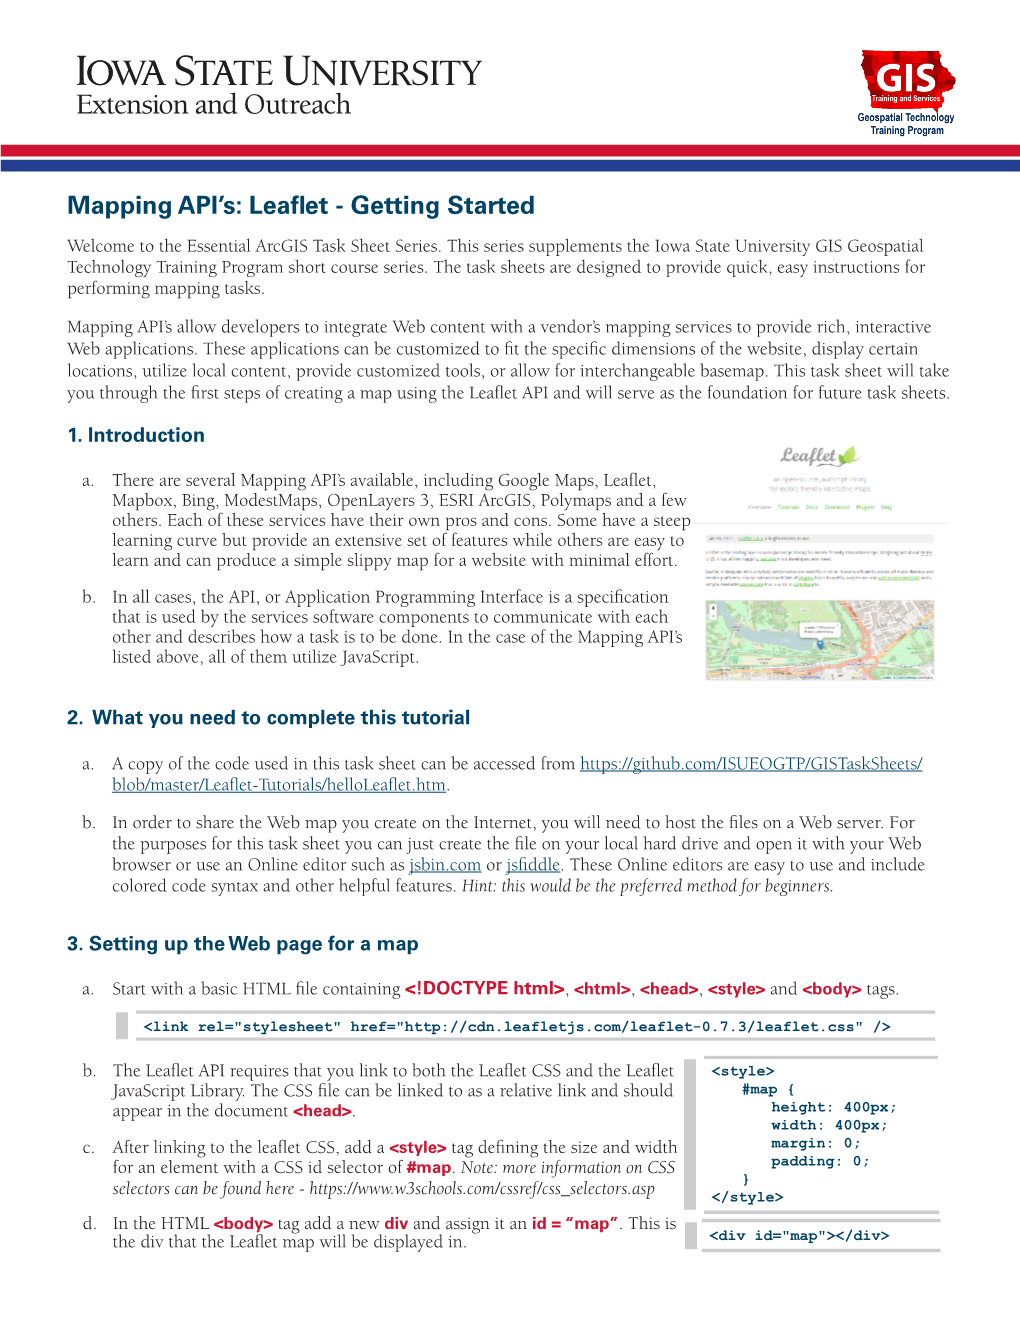 Leaflet - Getting Started Welcome to the Essential Arcgis Task Sheet Series